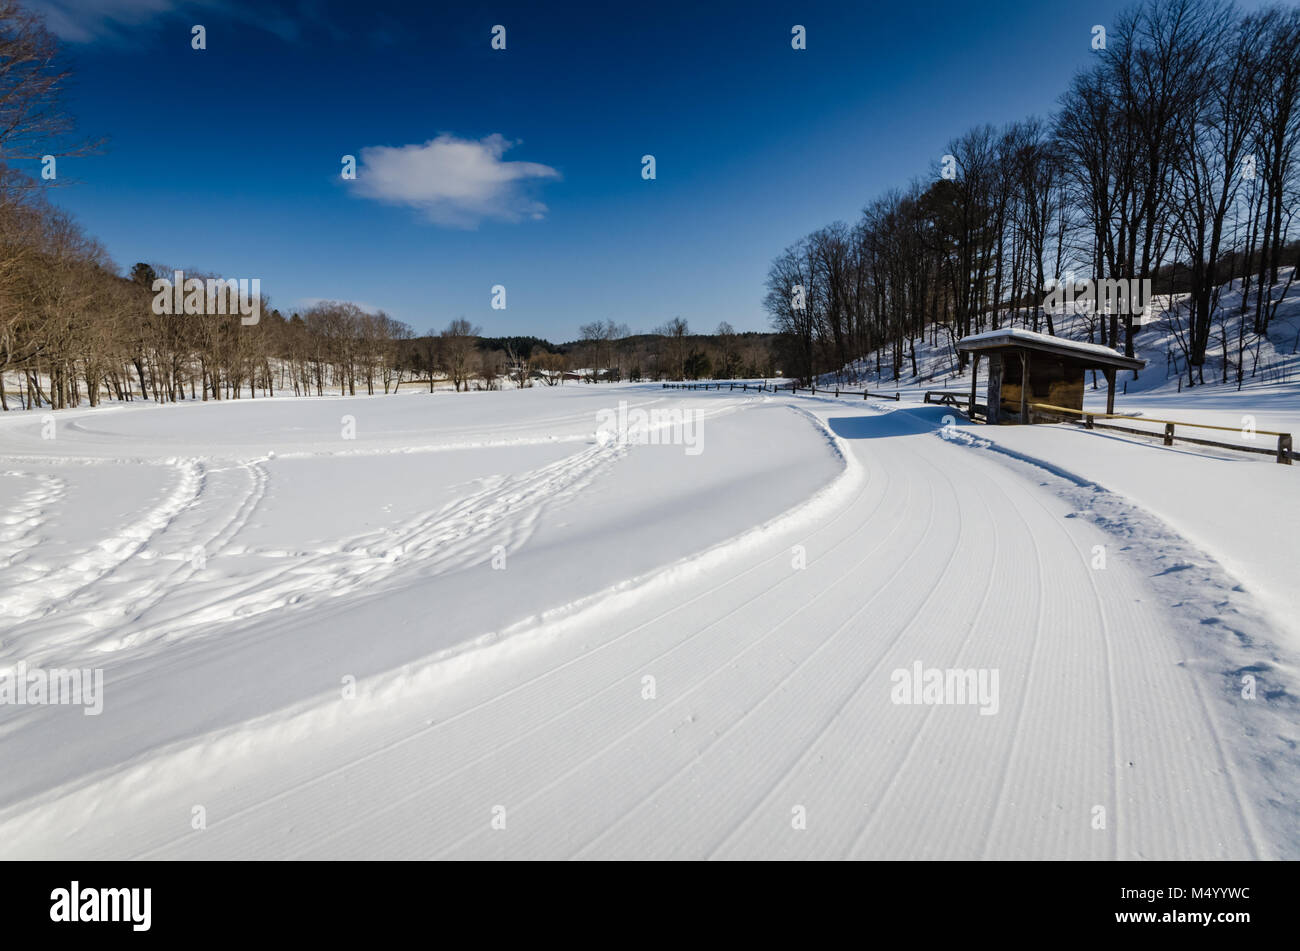 Grafton Ponds focuses on cross country skiing, snowshoeing, ice skating and tubing on a 600-foot hill. Stock Photo